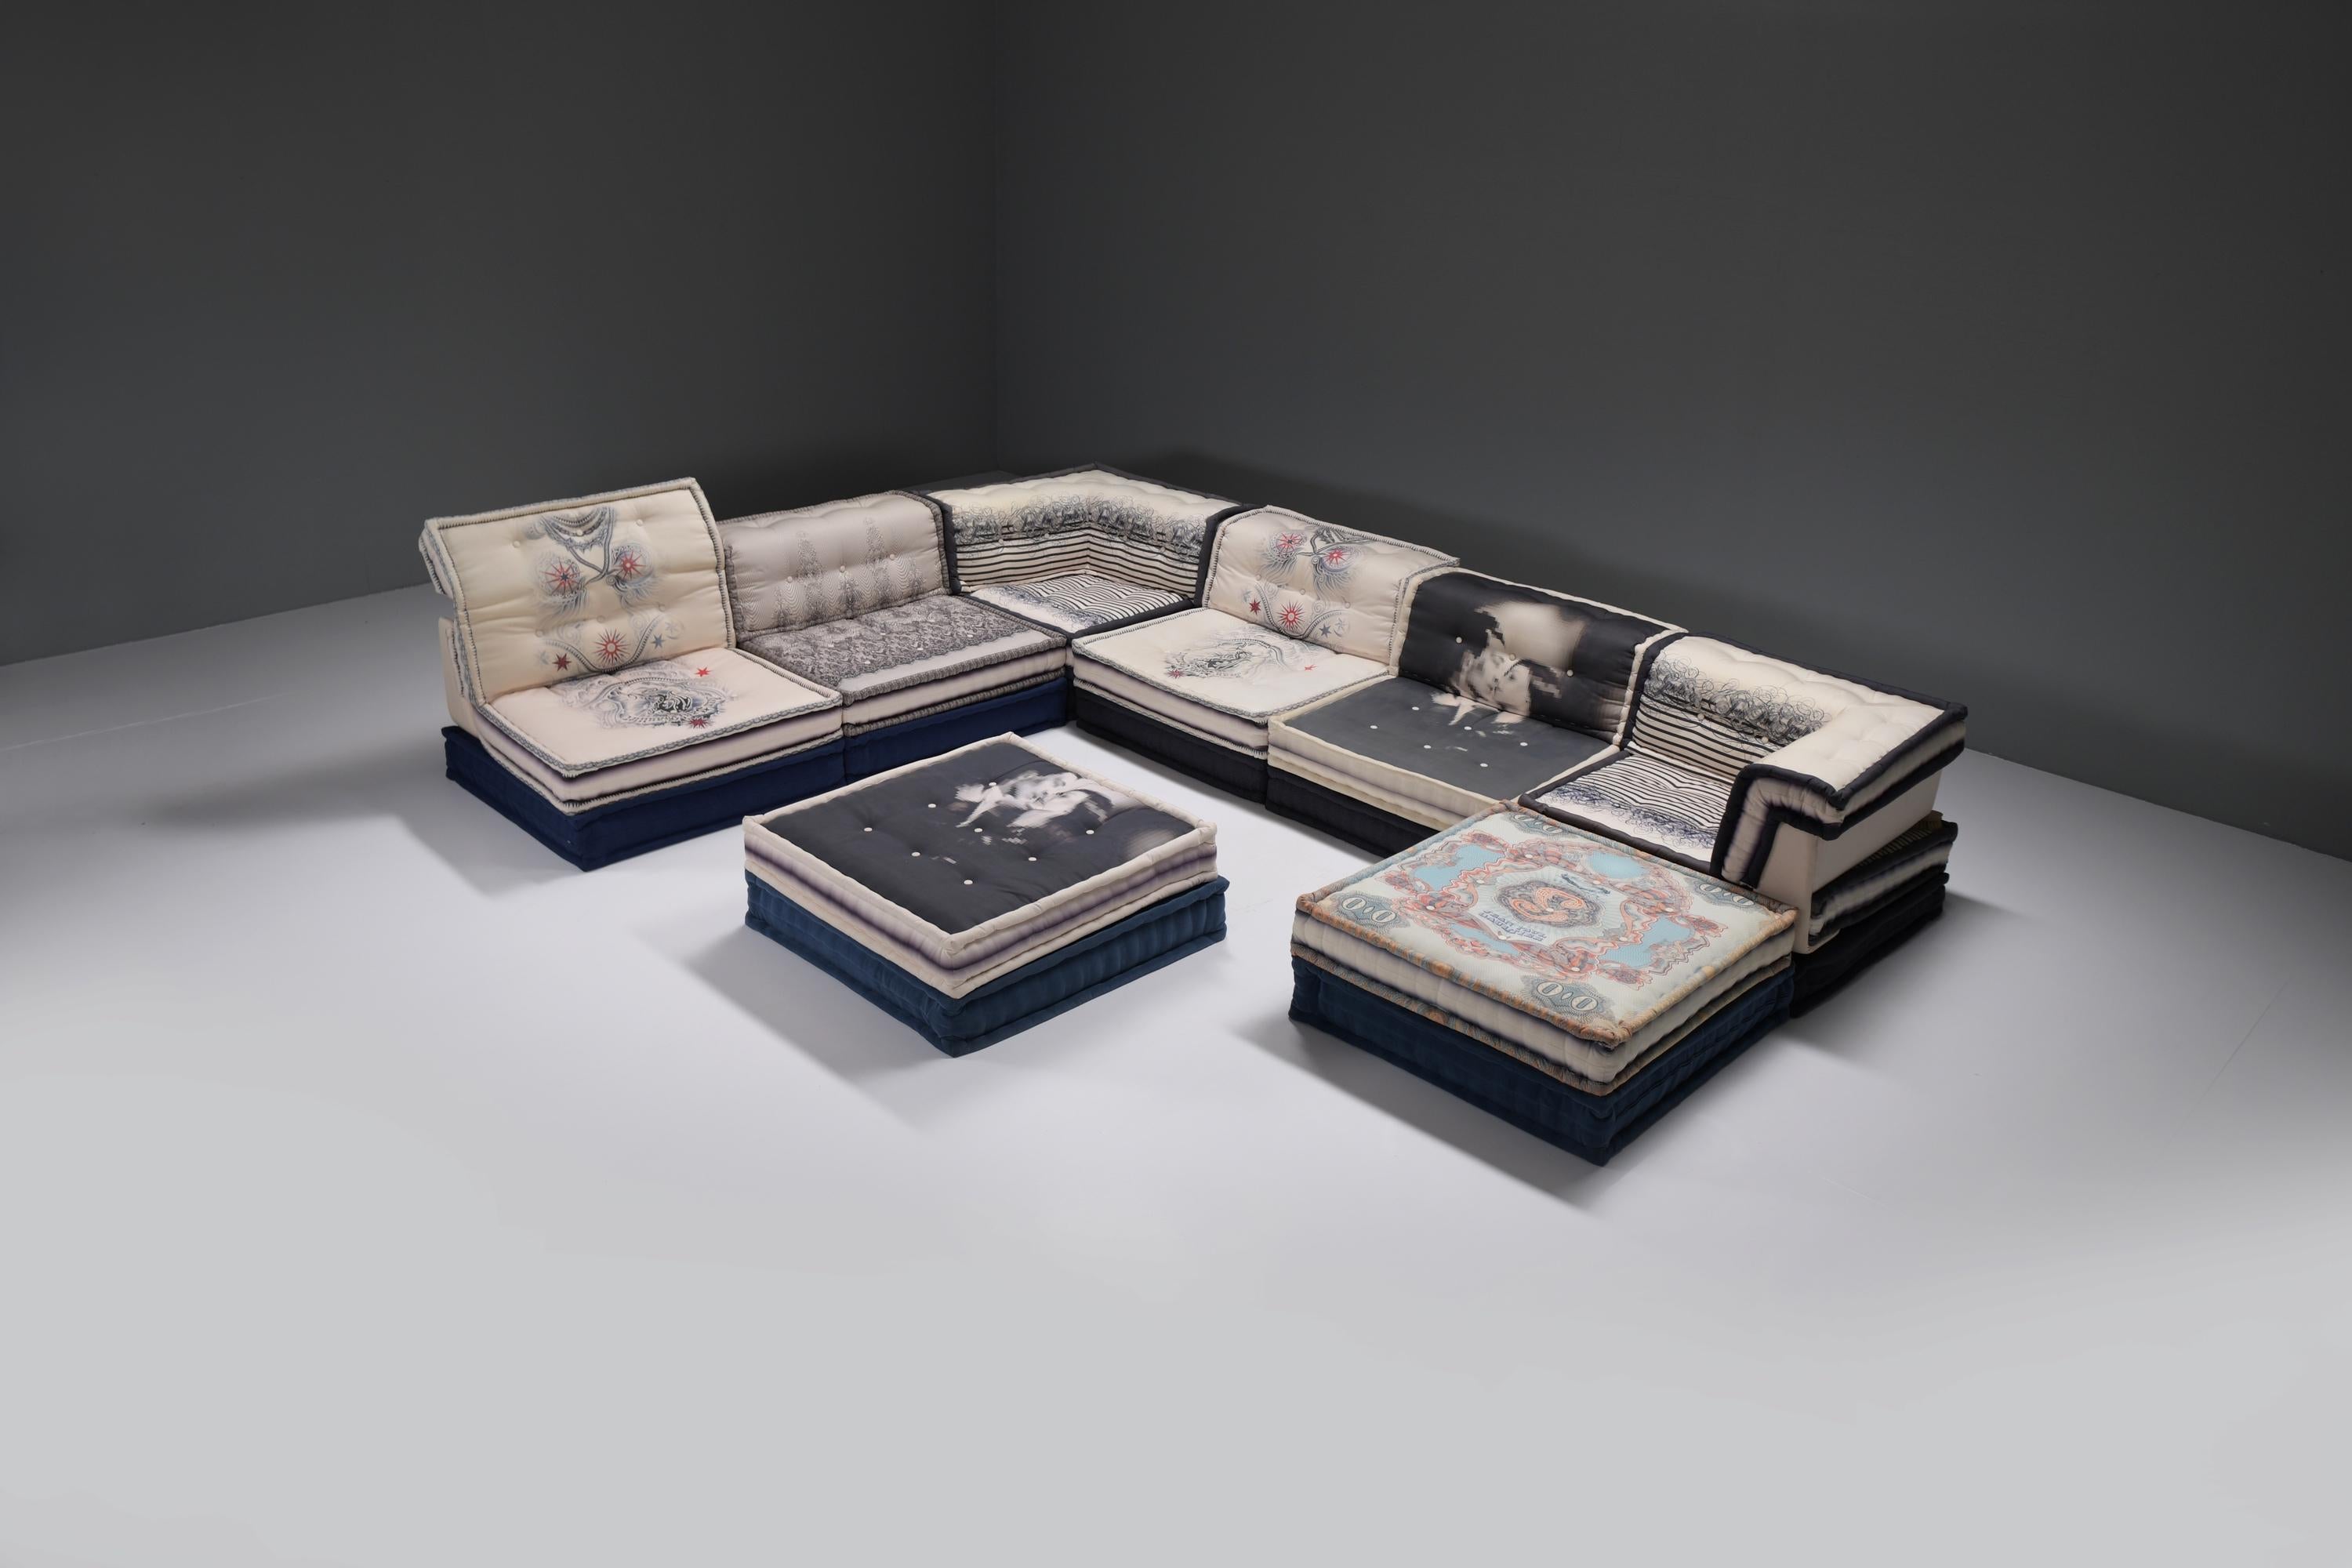 Stunning XL Mah Jong set in the ‘Jean-Paul Gaultier’ version.  A rare find on the second hand market.
Designed by Hans Hopfer for Roche Bobois.

Designed by Hans Hopfer in 1971, the Mah Jong sofa is an iconic model of the Roche Bobois collections,